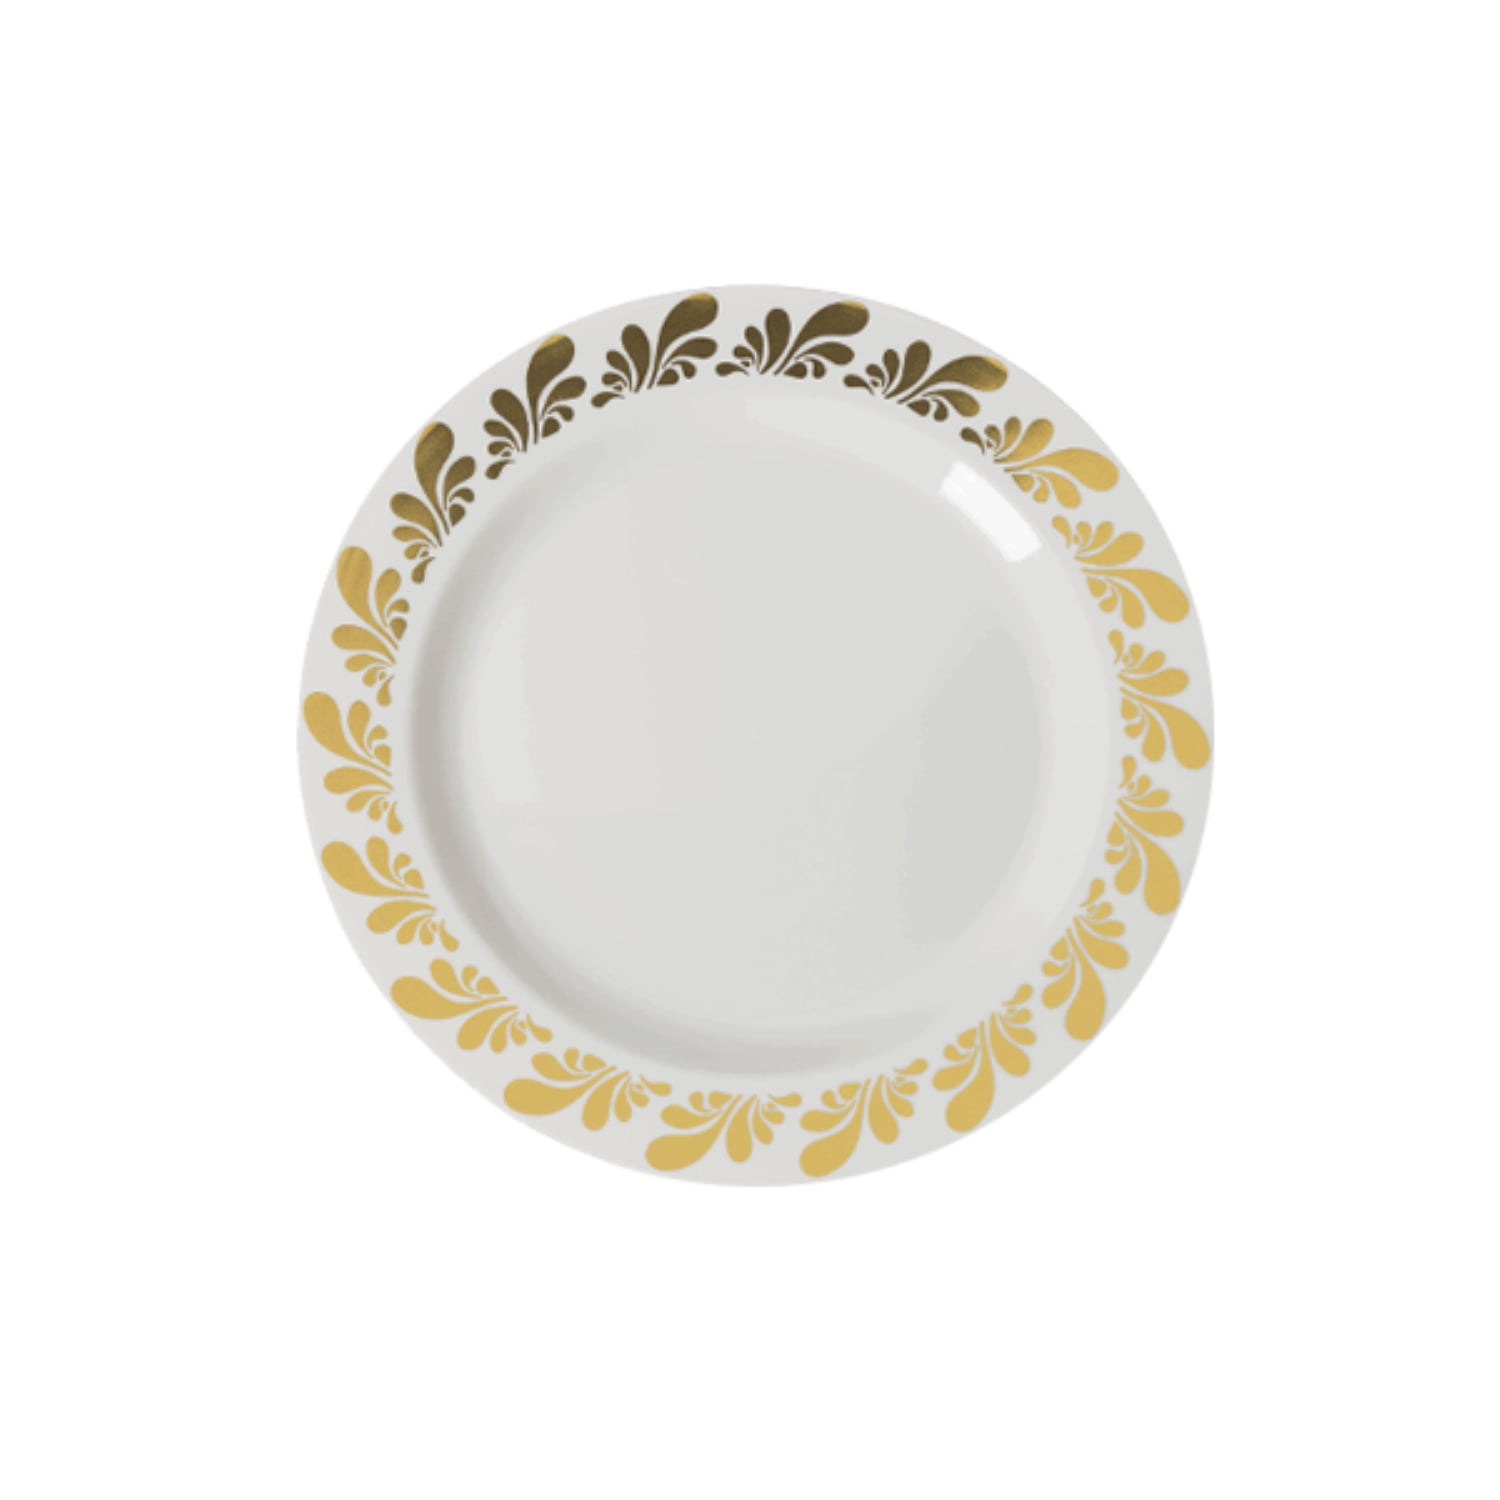 Set of 4 8" Dessert Plates - BRAND NEW Gold Metallic Stars Details about   PAMPERED CHEF 